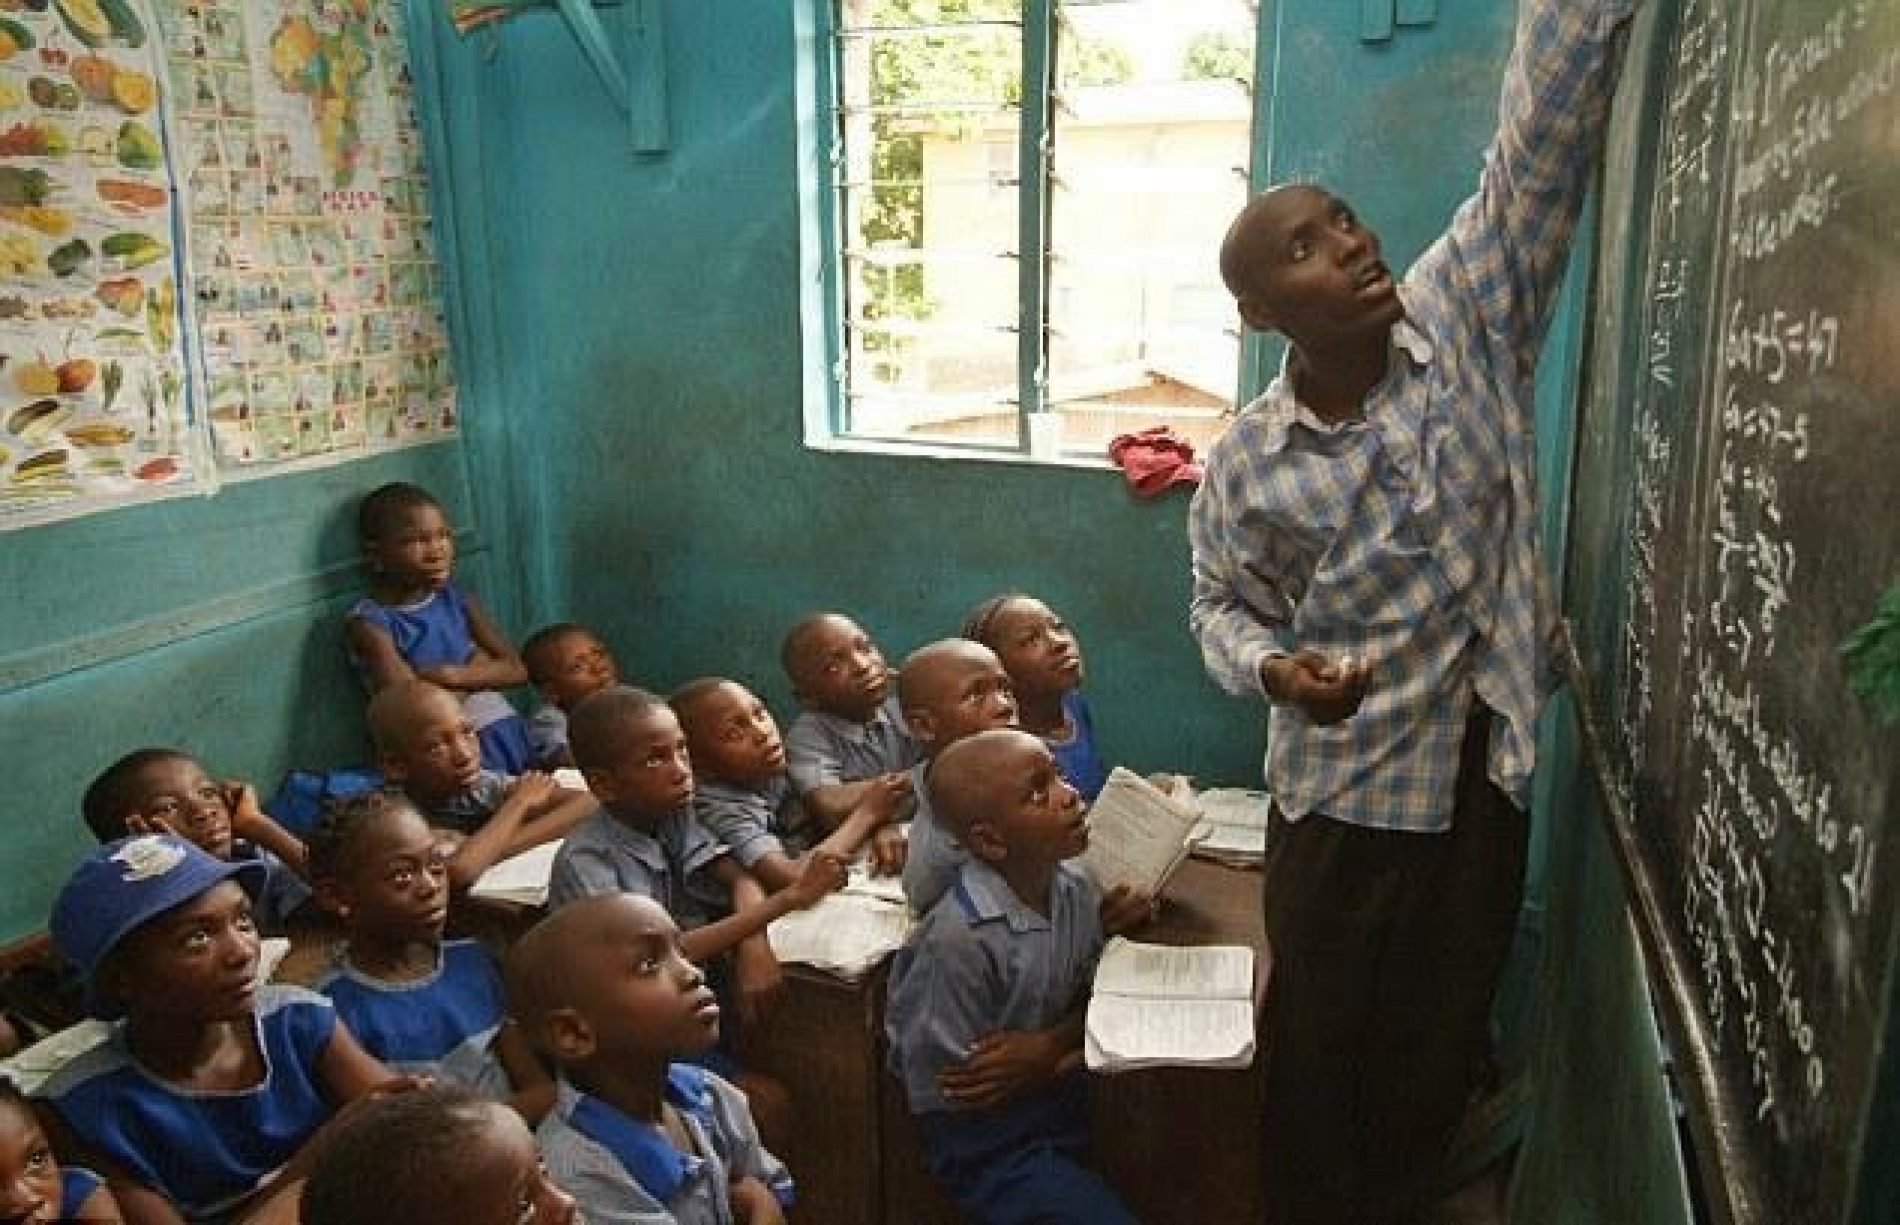 Zimbabwean school teacher’s coming out unleashes a furious outcry